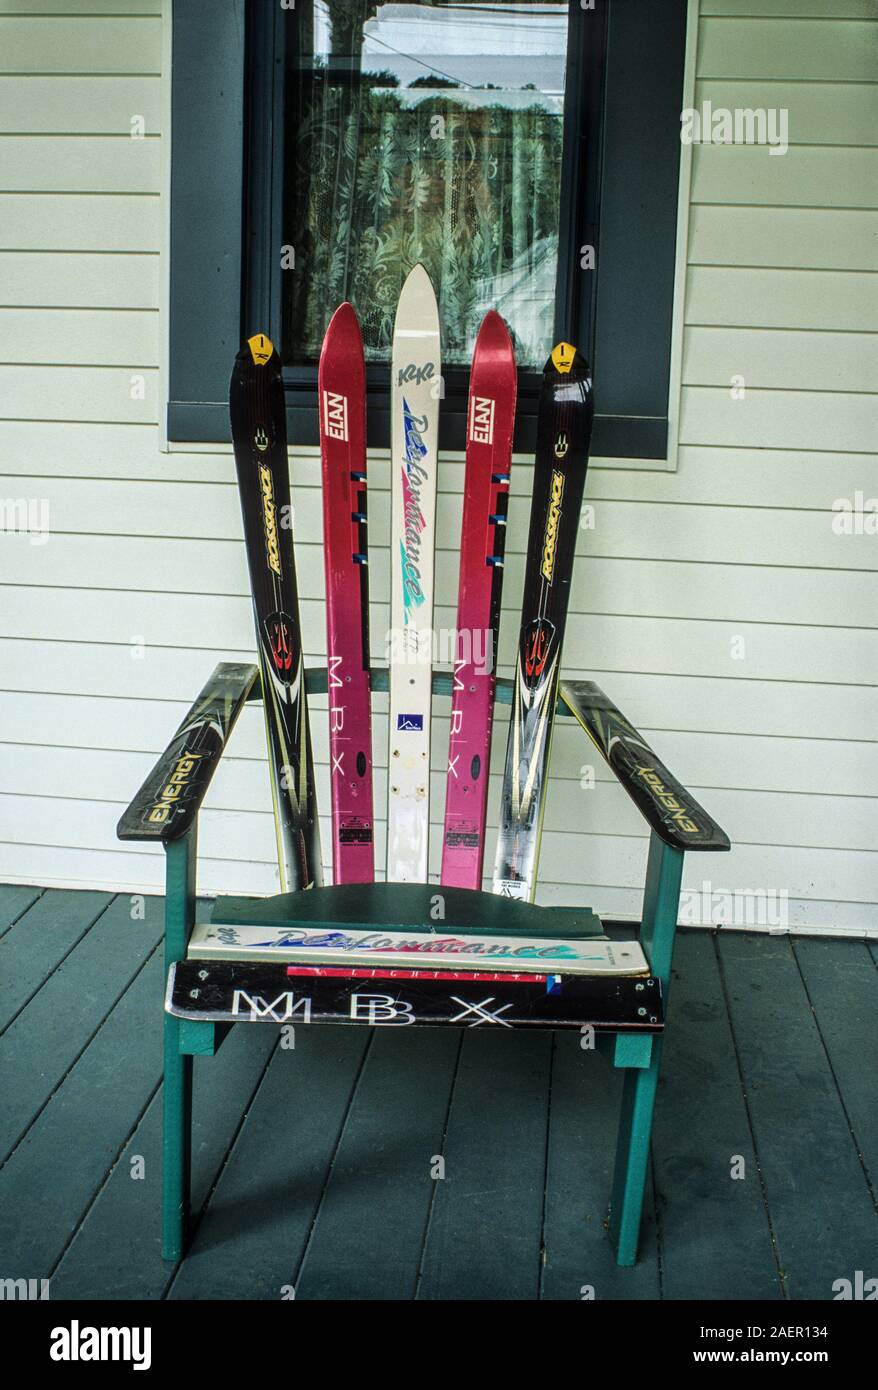 Porch Adirondack Chair Made With Vintage Skis New Hampshire New